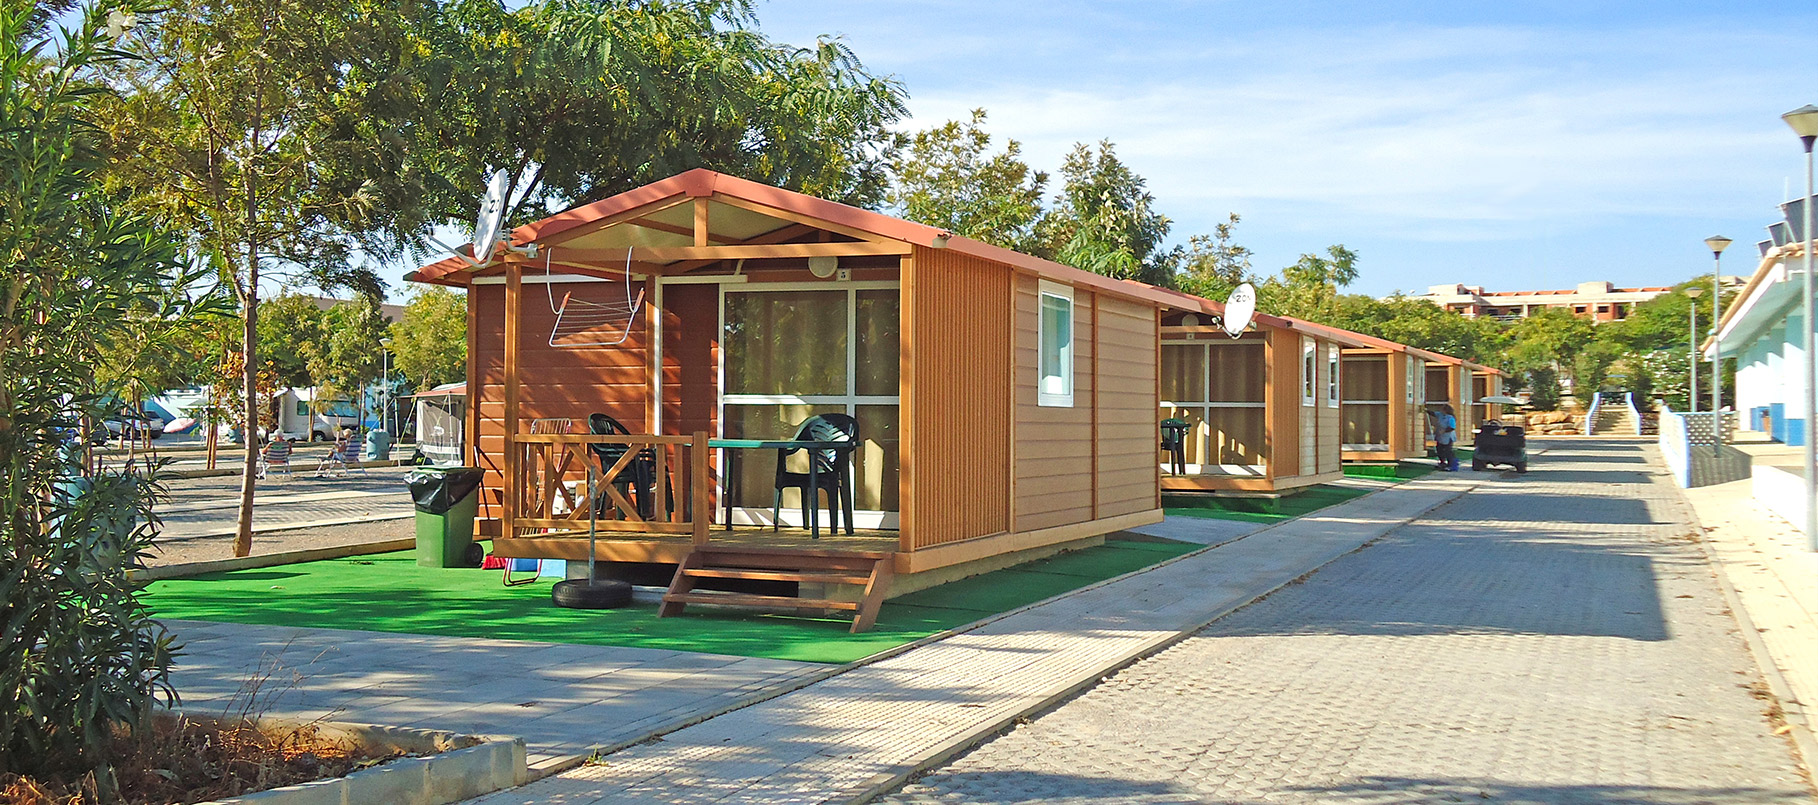 Large camp site and holiday chalets in Tavira - Algarve